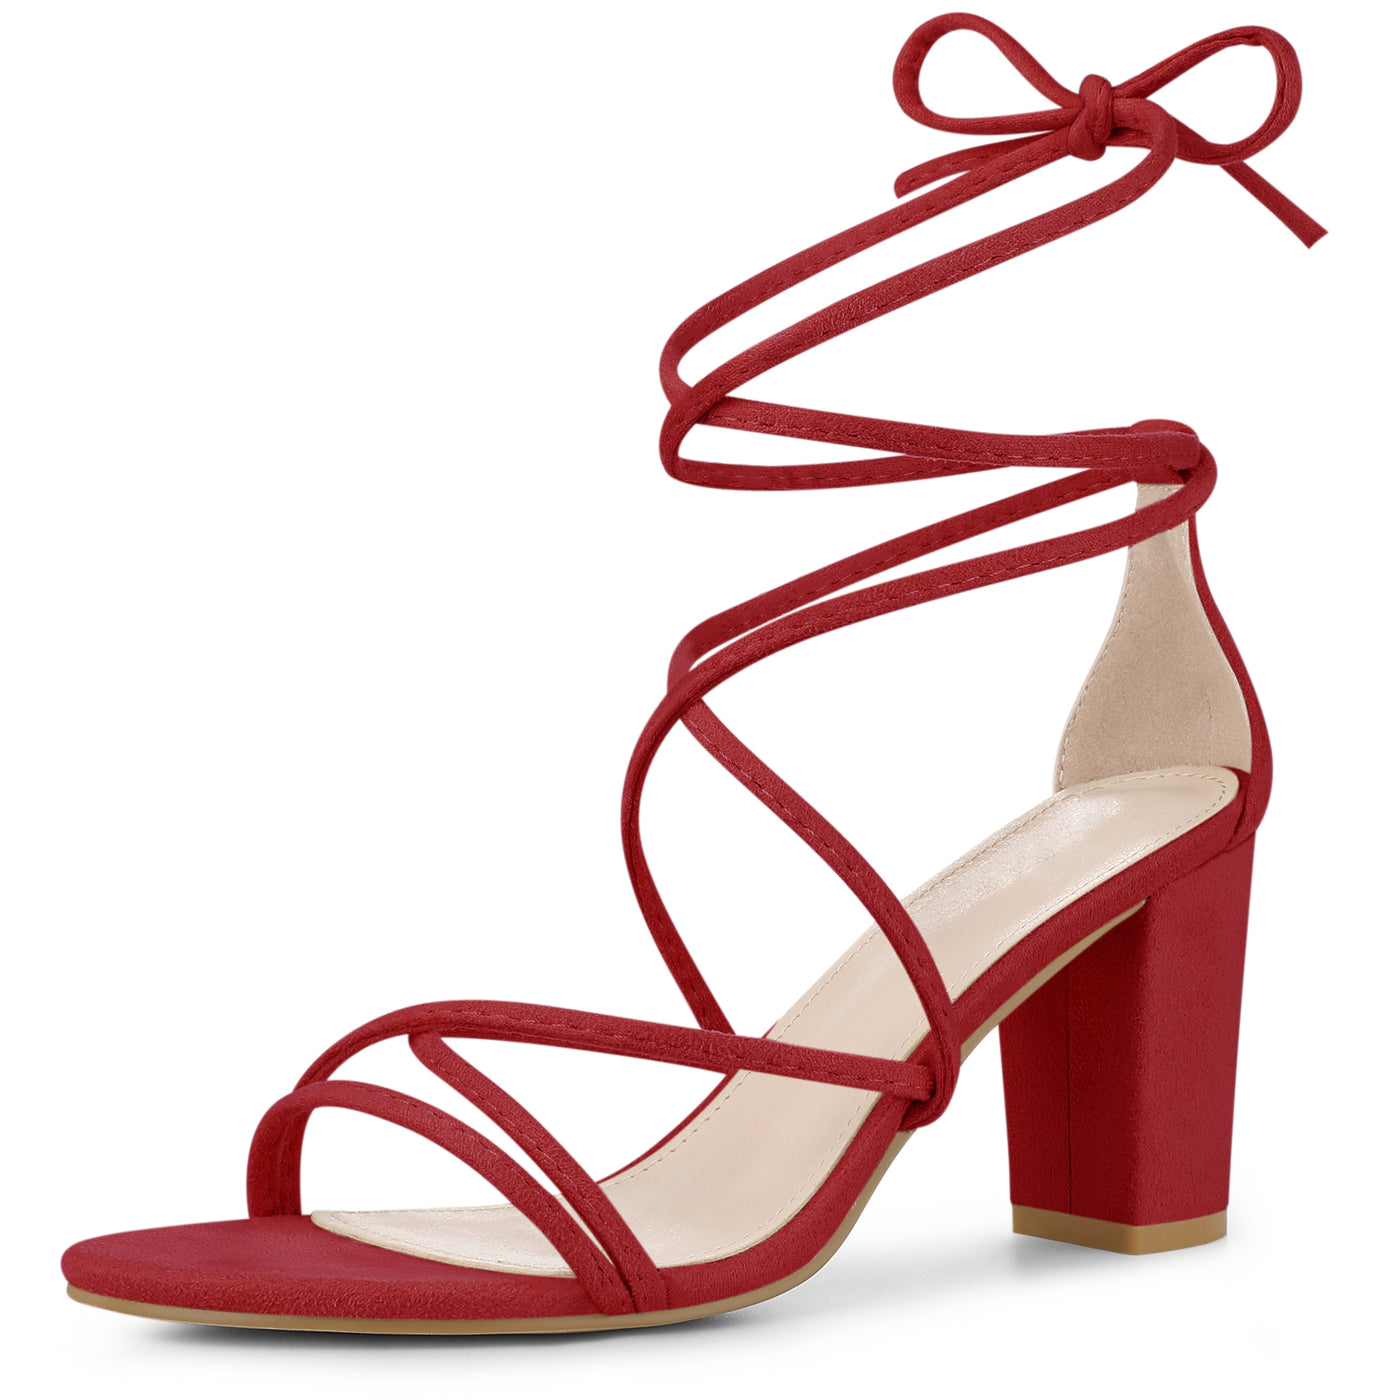 Red Strappy Chunky Heels|elegant Lace-up Block Heel Sandals - Women's  Summer Dress Shoes